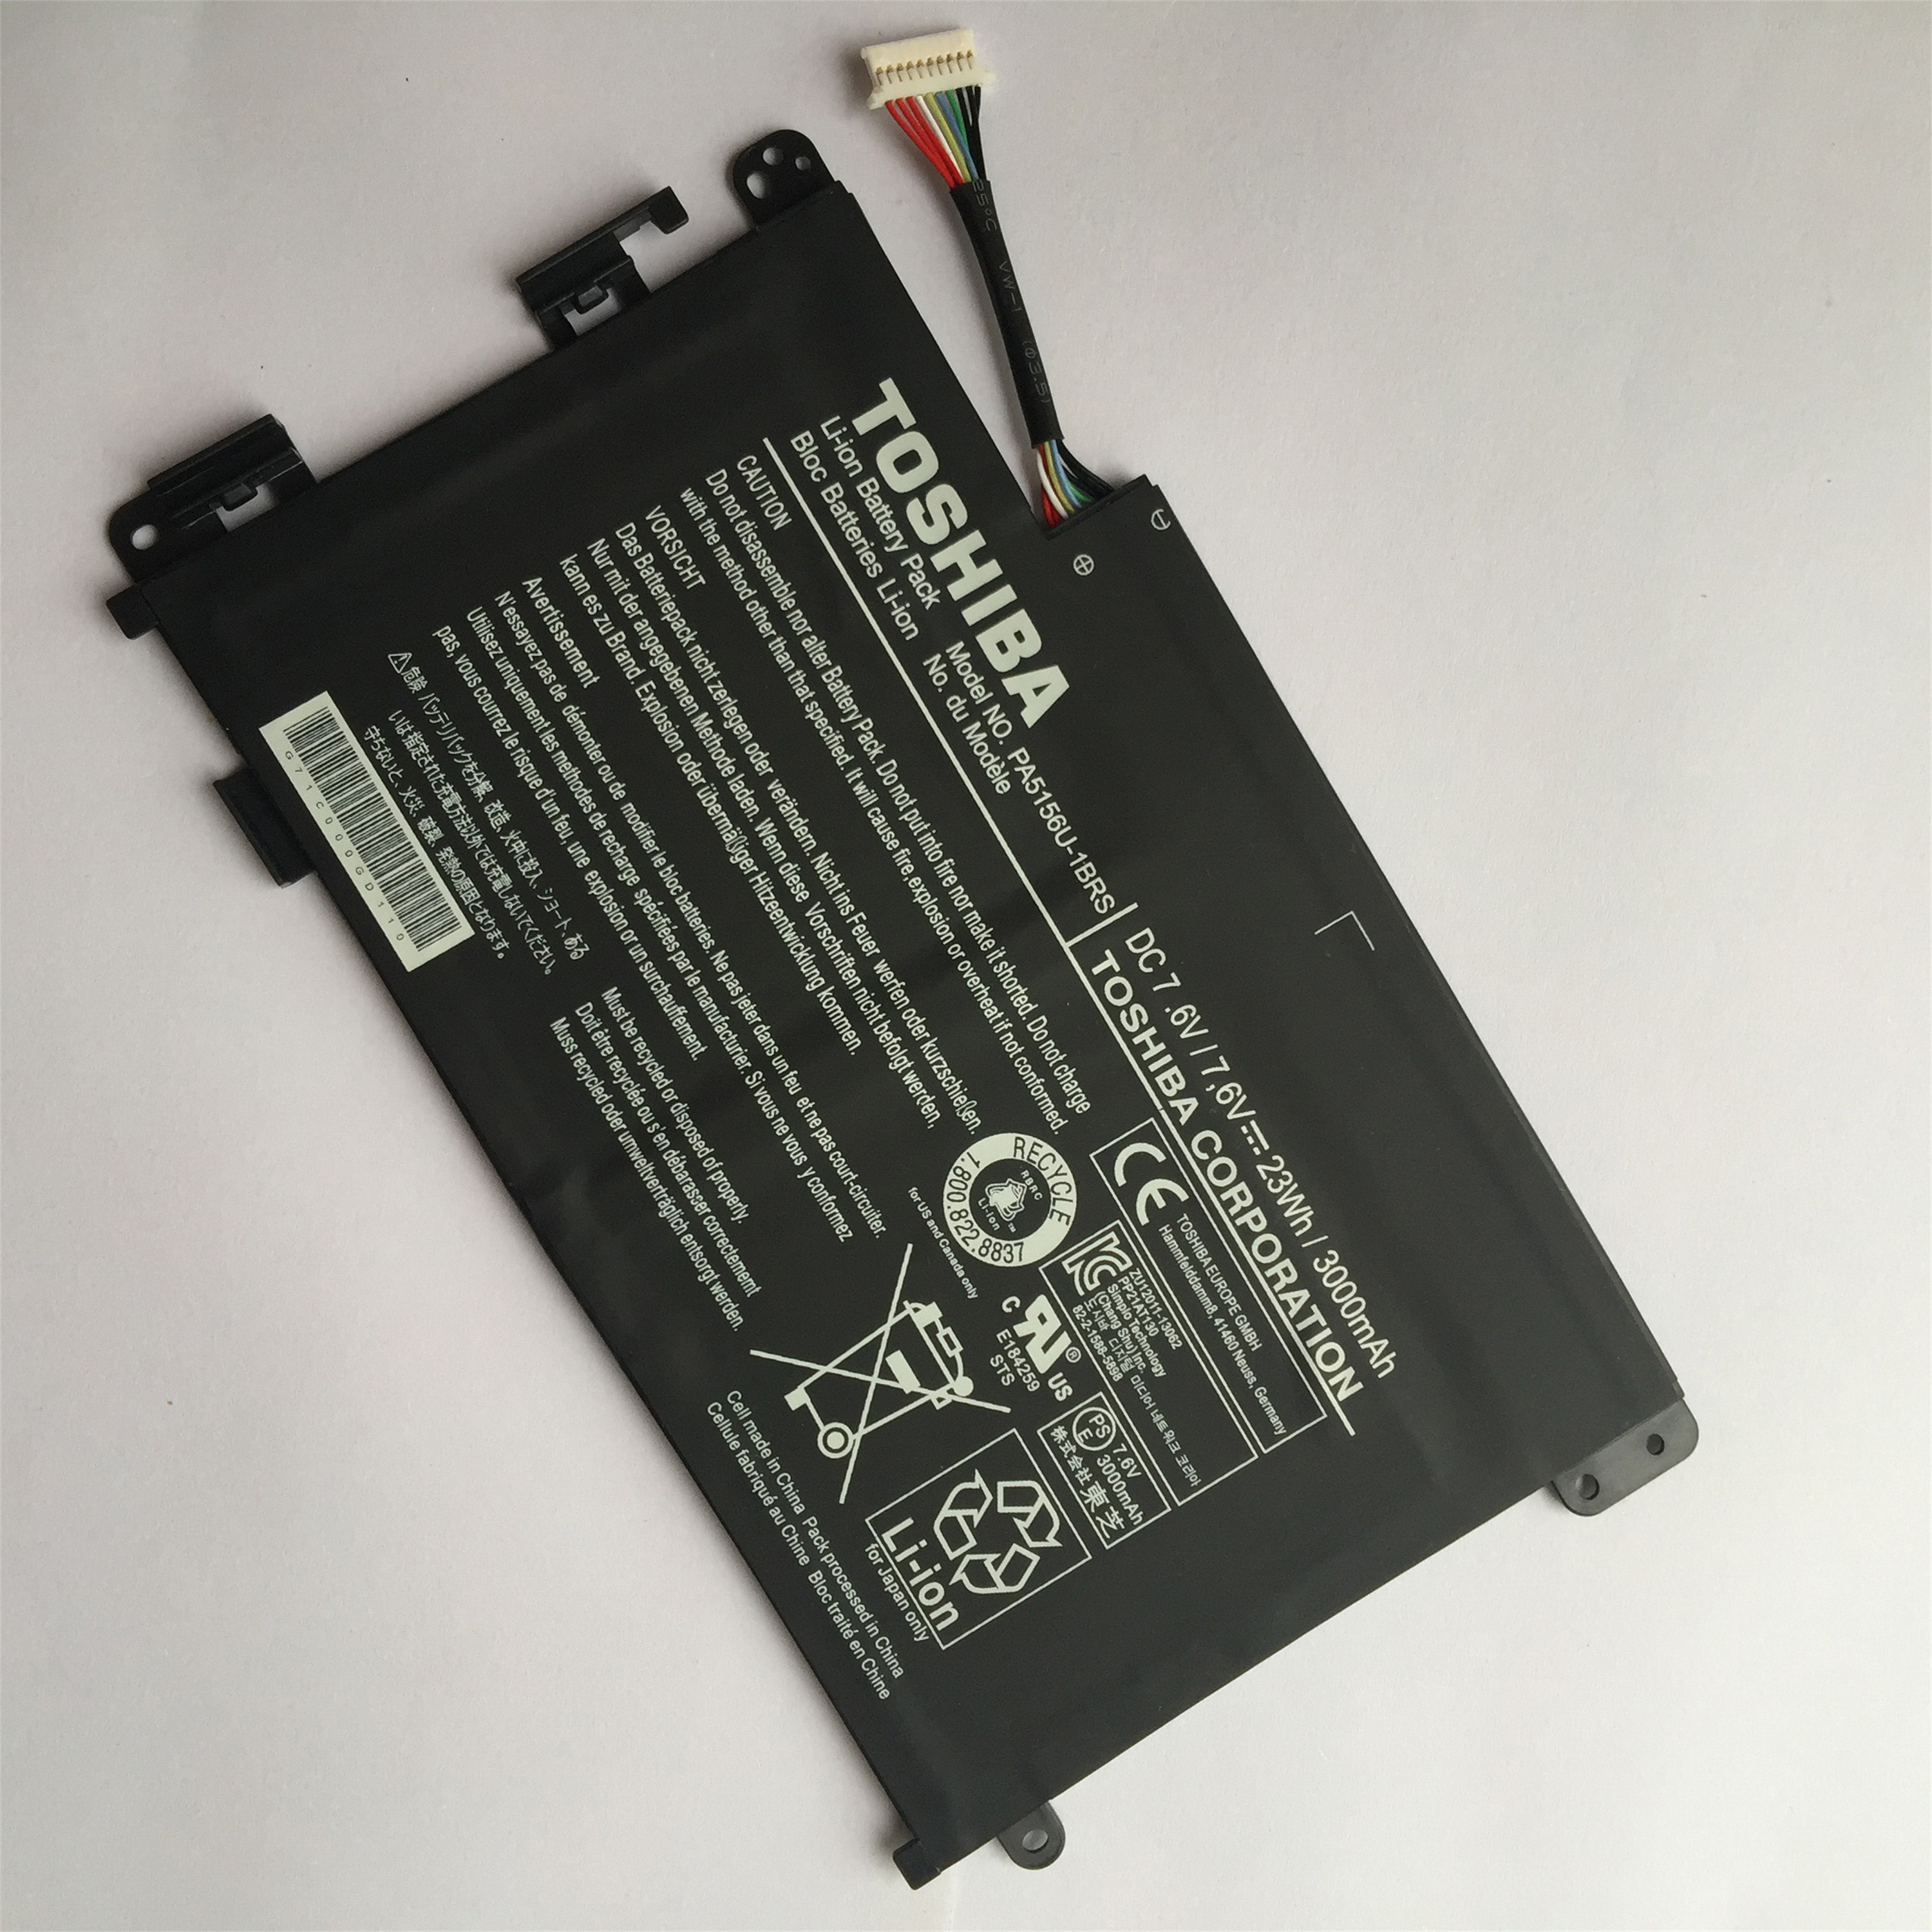 PA5156U-1BRS rechargeable lithium ion Notebook battery Laptop battery W35DT P000577240 7.6V 23Wh 3000mAh